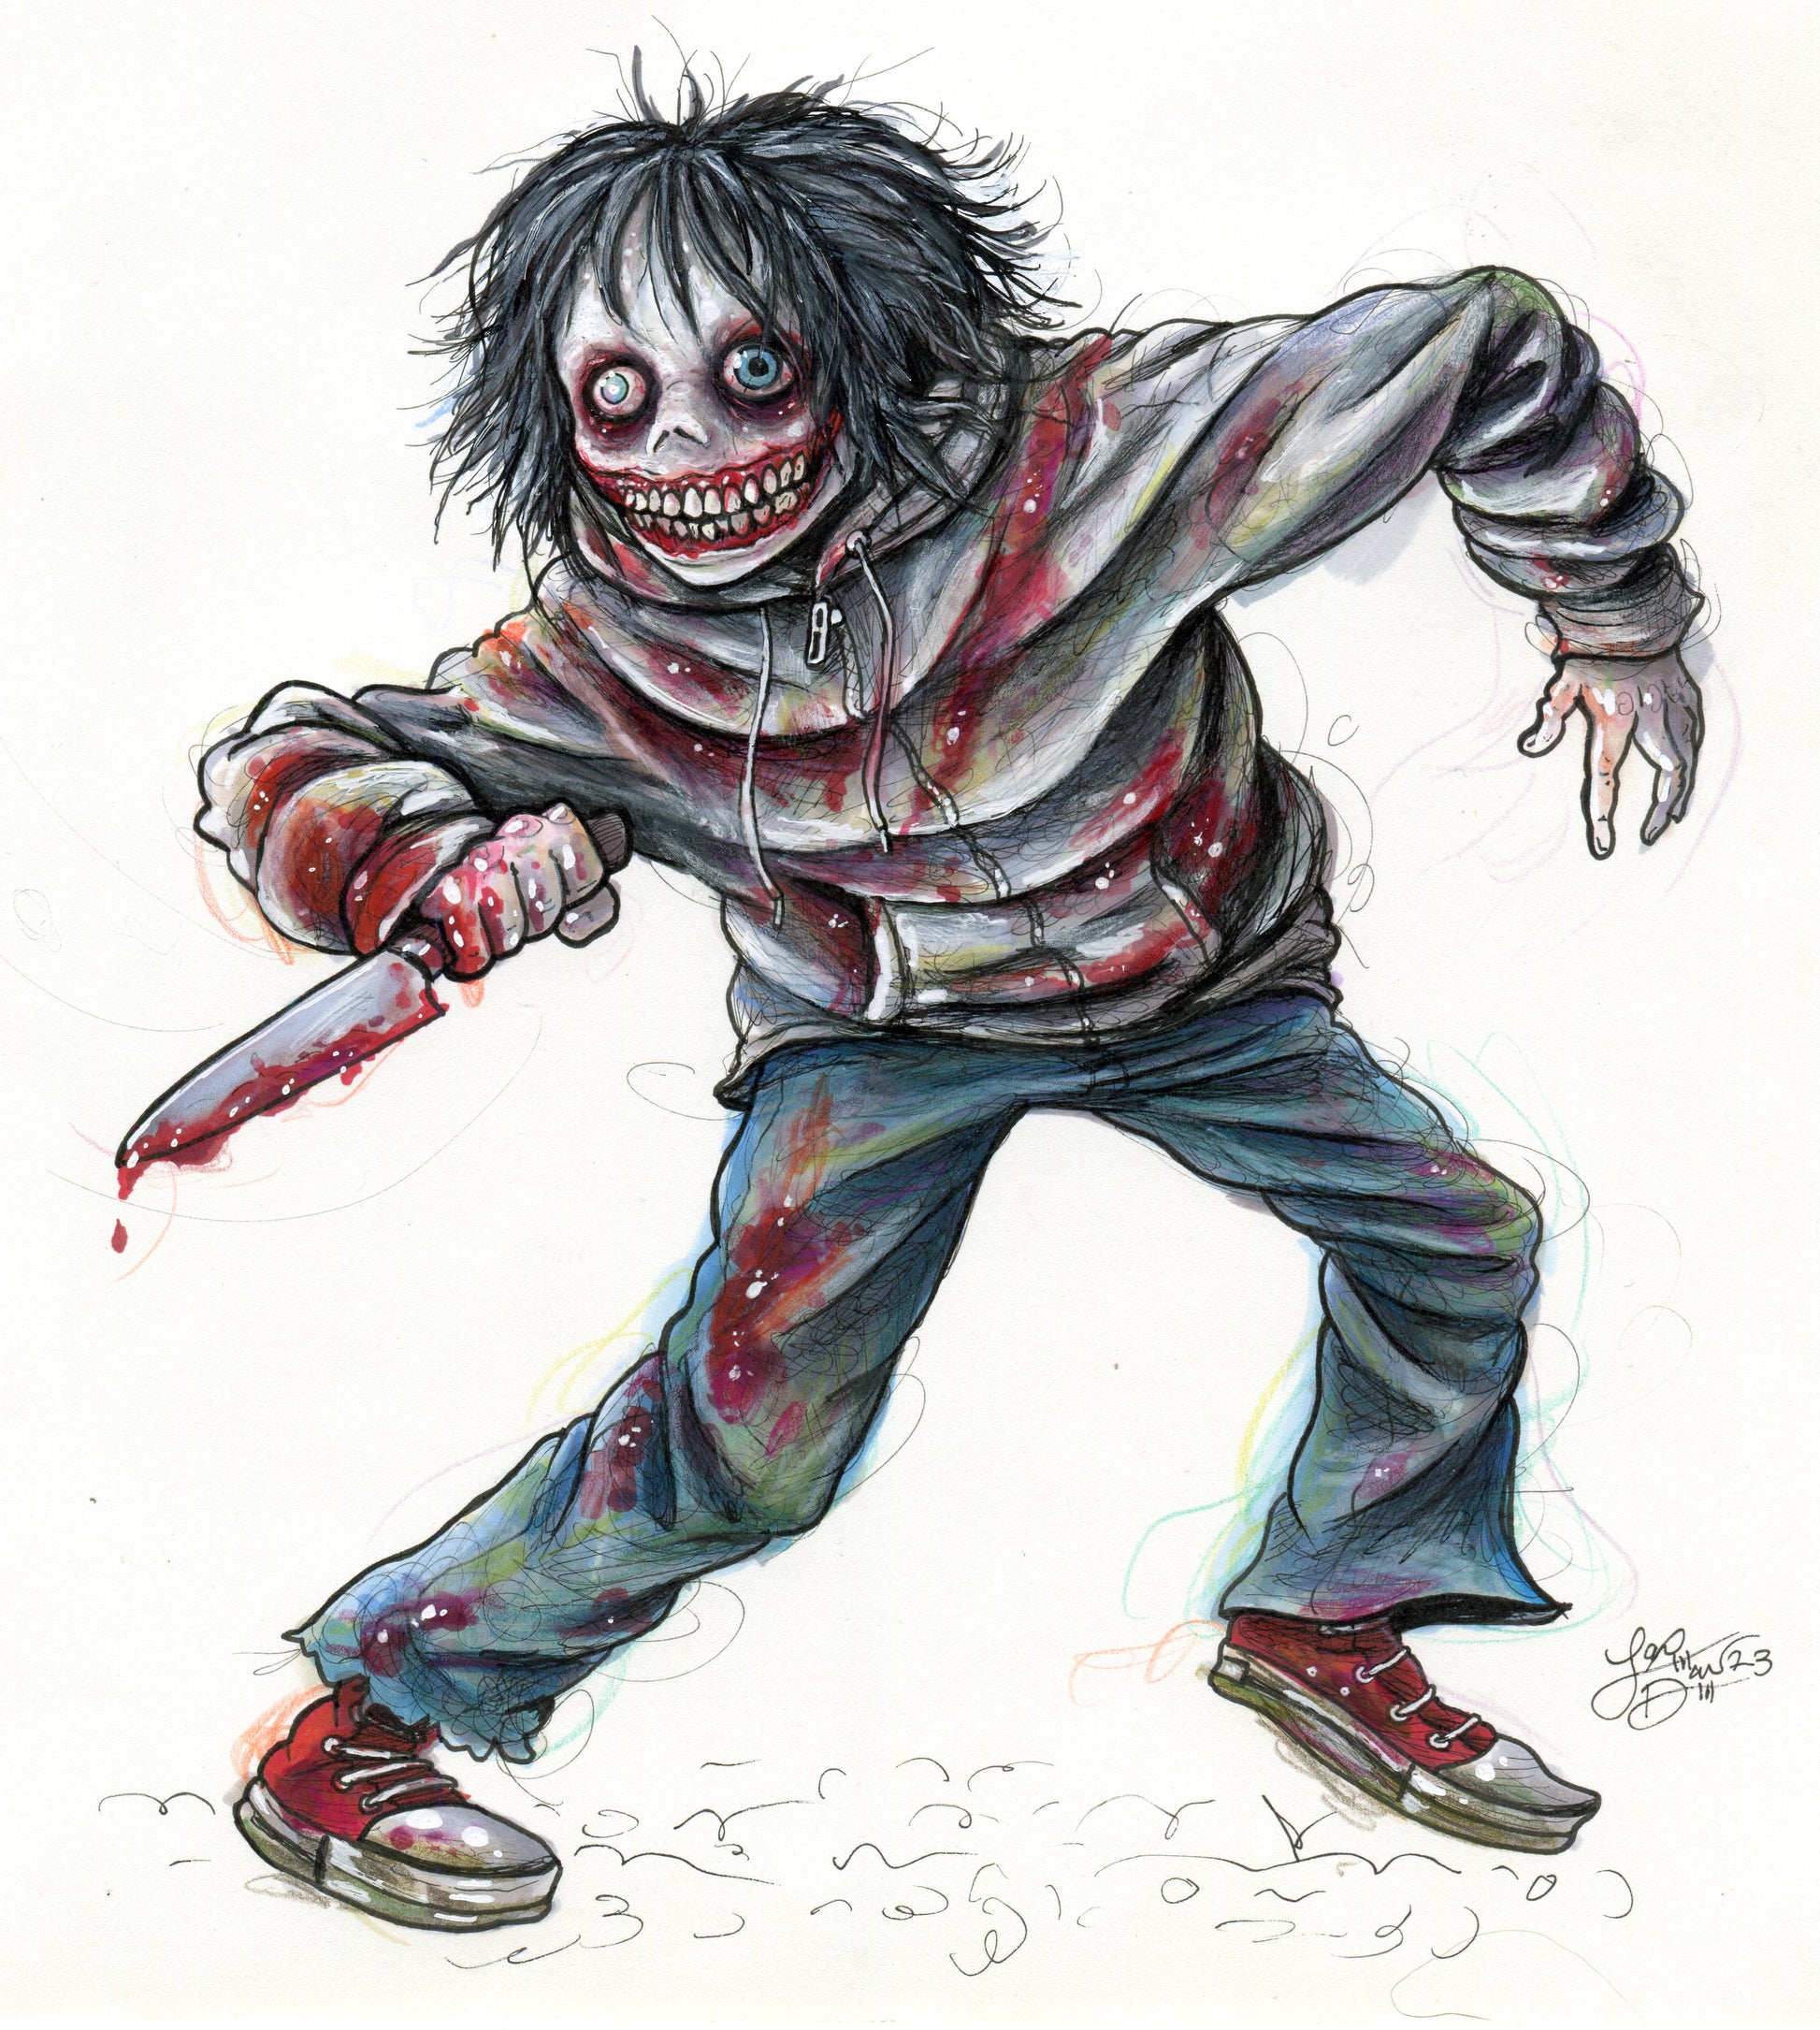 The Most Terrifying Jeff the Killer Creepypasta Stories Ever